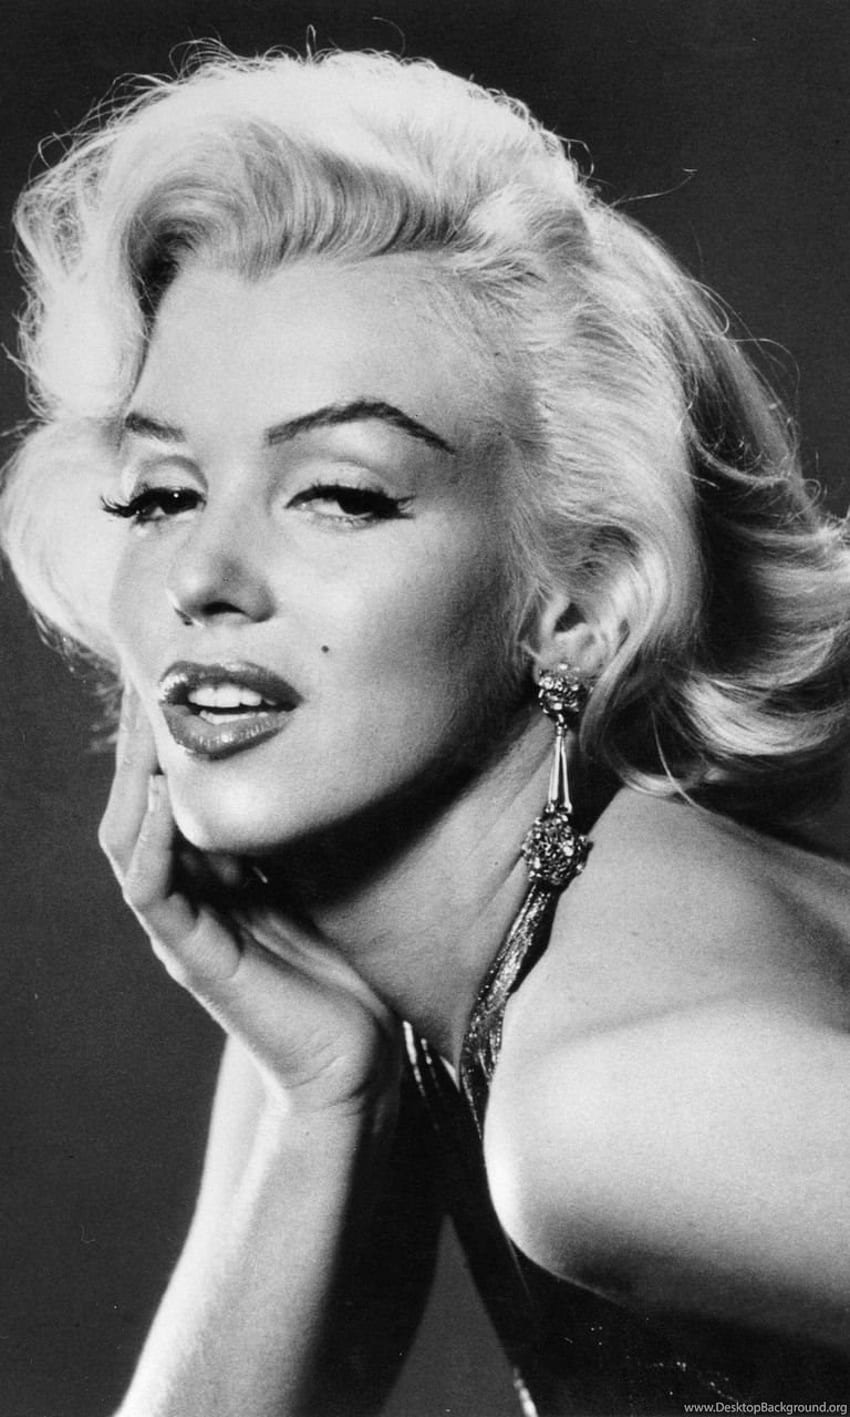 Marilyn Monroe is one of the most iconic and recognizable stars in the history of Hollywood. - Marilyn Monroe